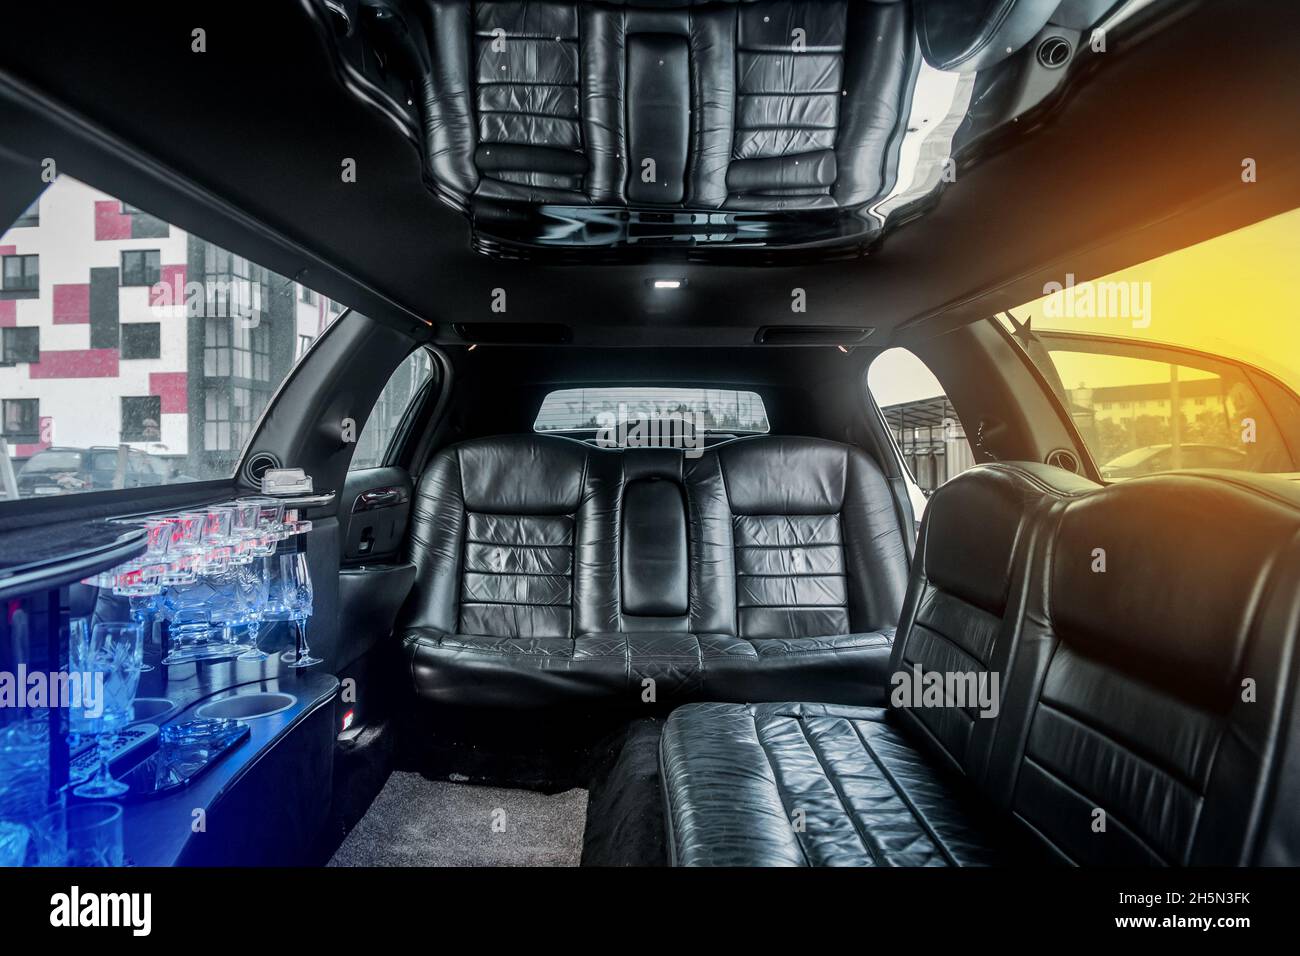 Luxury car interior limousine with black leather seats and a small bar inside the interior of the car. Stock Photo